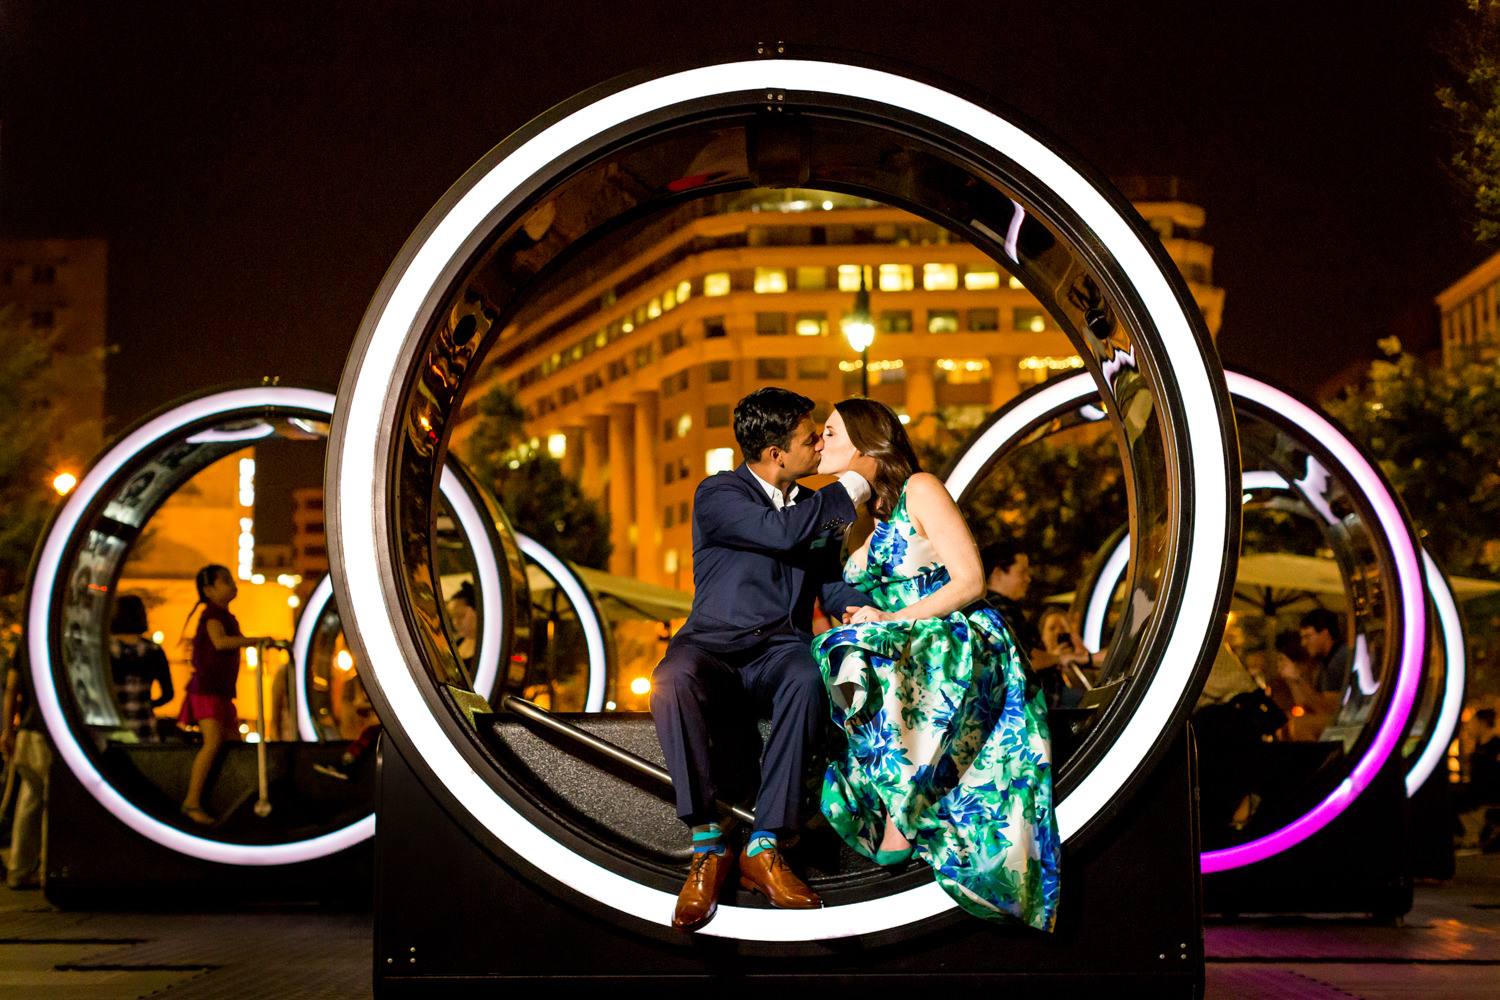 This is a Washington DC engagement session at City Place, The photo was taken at an art instillation, the couple is sitting inside of glowing rings and kissing, night shot, you can see the glowing buildings behind them, the gal is in a blue and green floor length party dress, Procopio Photography, best top Washington DC photographer, best top Maryland photographer, best top Virginia photographer, best top DMV photographer, best top wedding photographer, best top commercial photographer, best top portrait photographer, best top boudoir photographer, modern fine art portraits, dramatic, unique, different, bold, editorial, photojournalism, award winning photographer, published photographer, memorable images, be different, stand out, engagement photography